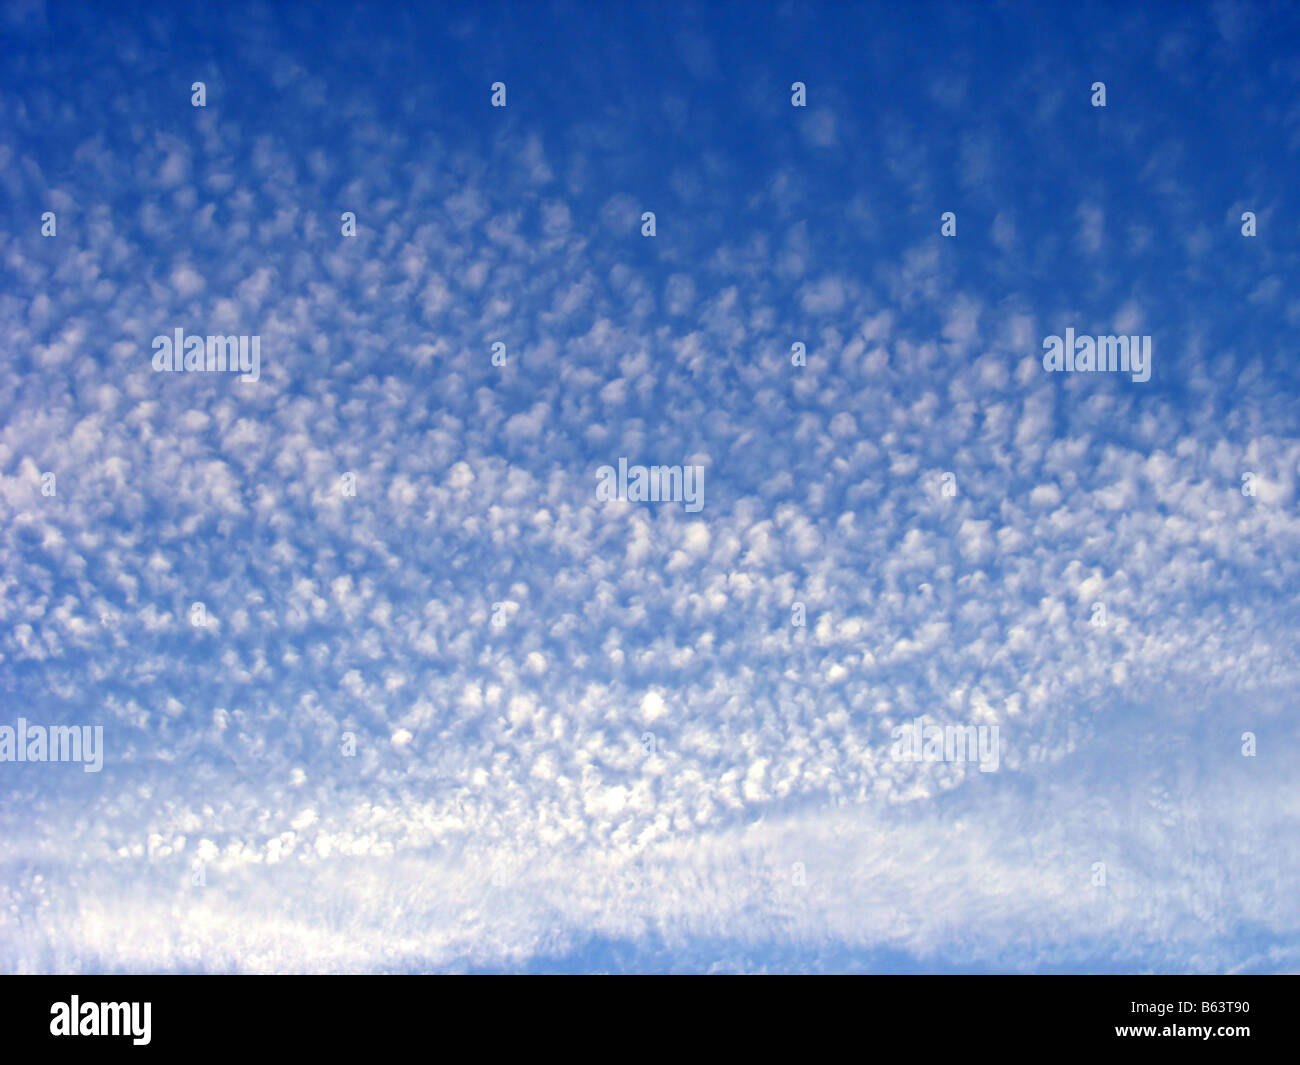 Puffy cotton like clouds spread across a bright blue sky Stock Photo